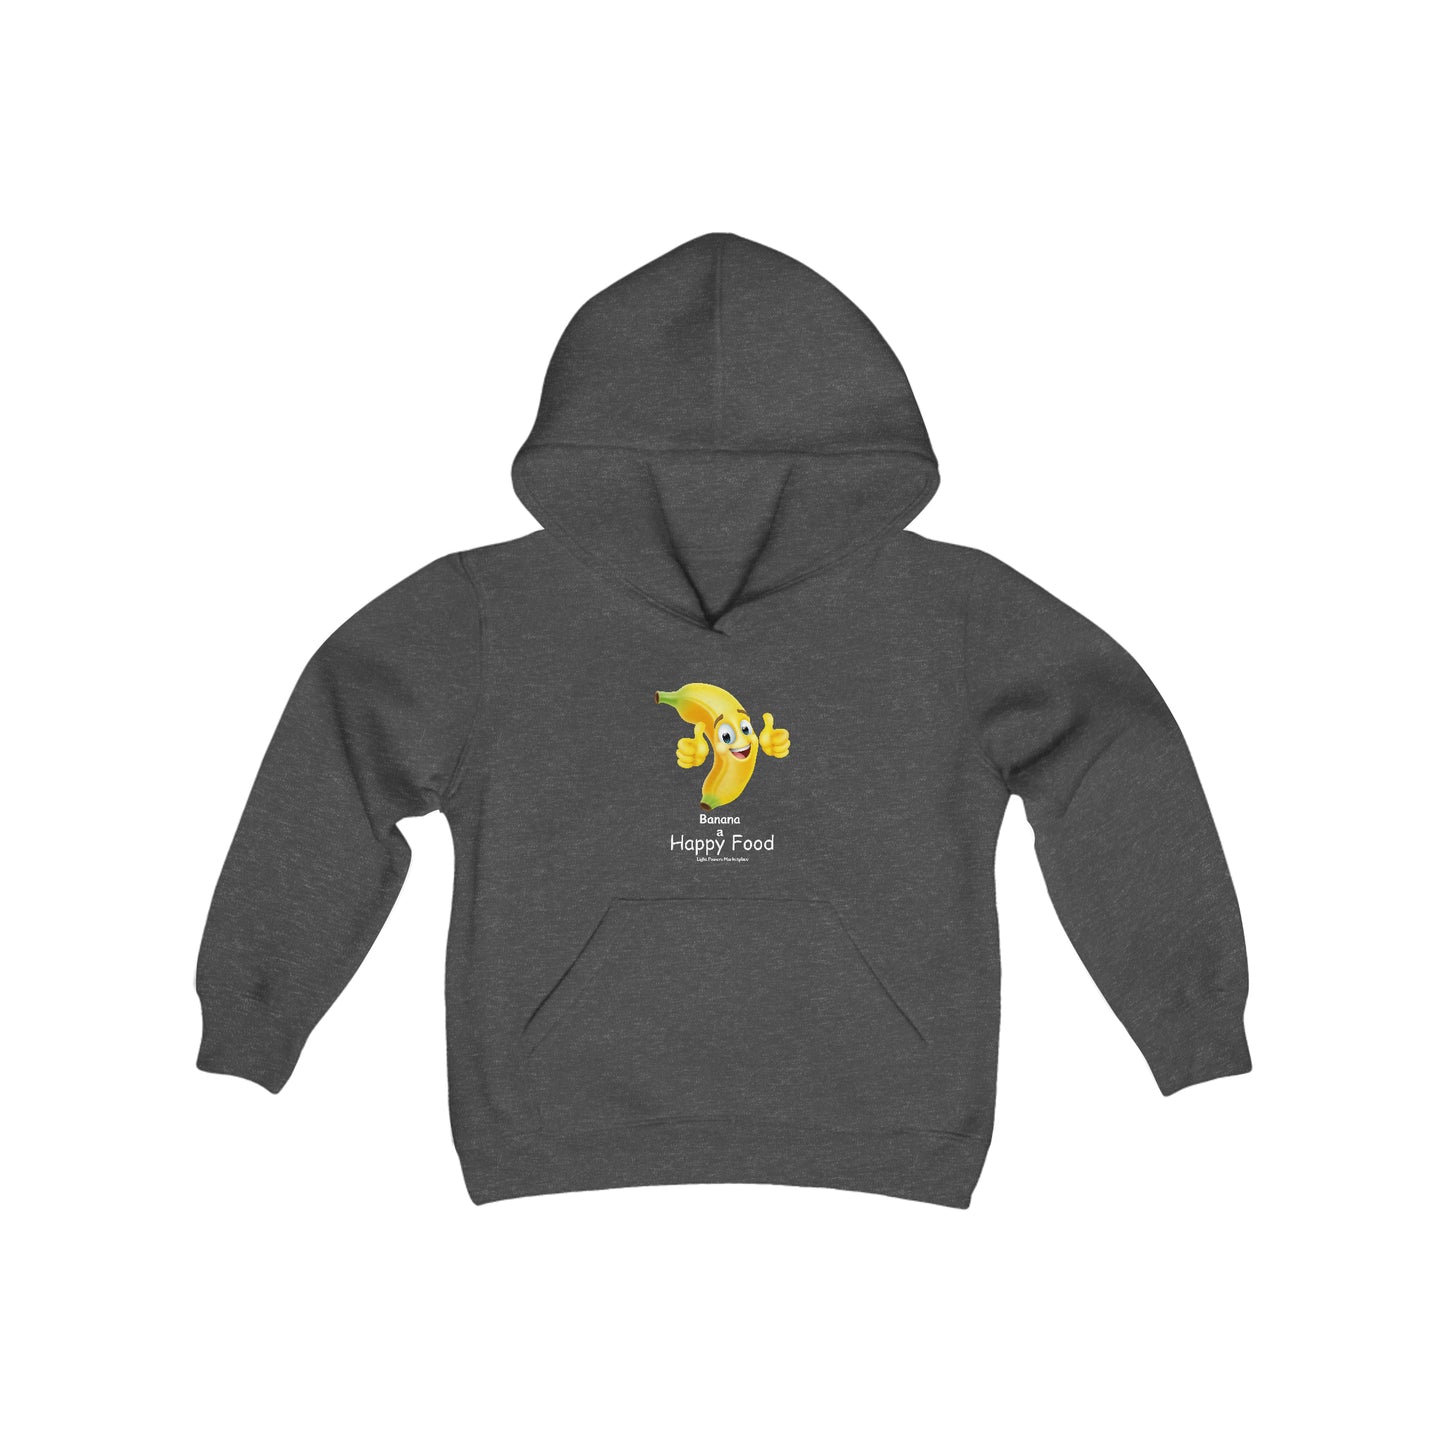 Light Passers Marketplace Banana Happy Food Youth Hooded Sweatshirt Nutrition, Simple Messages, Mental Health